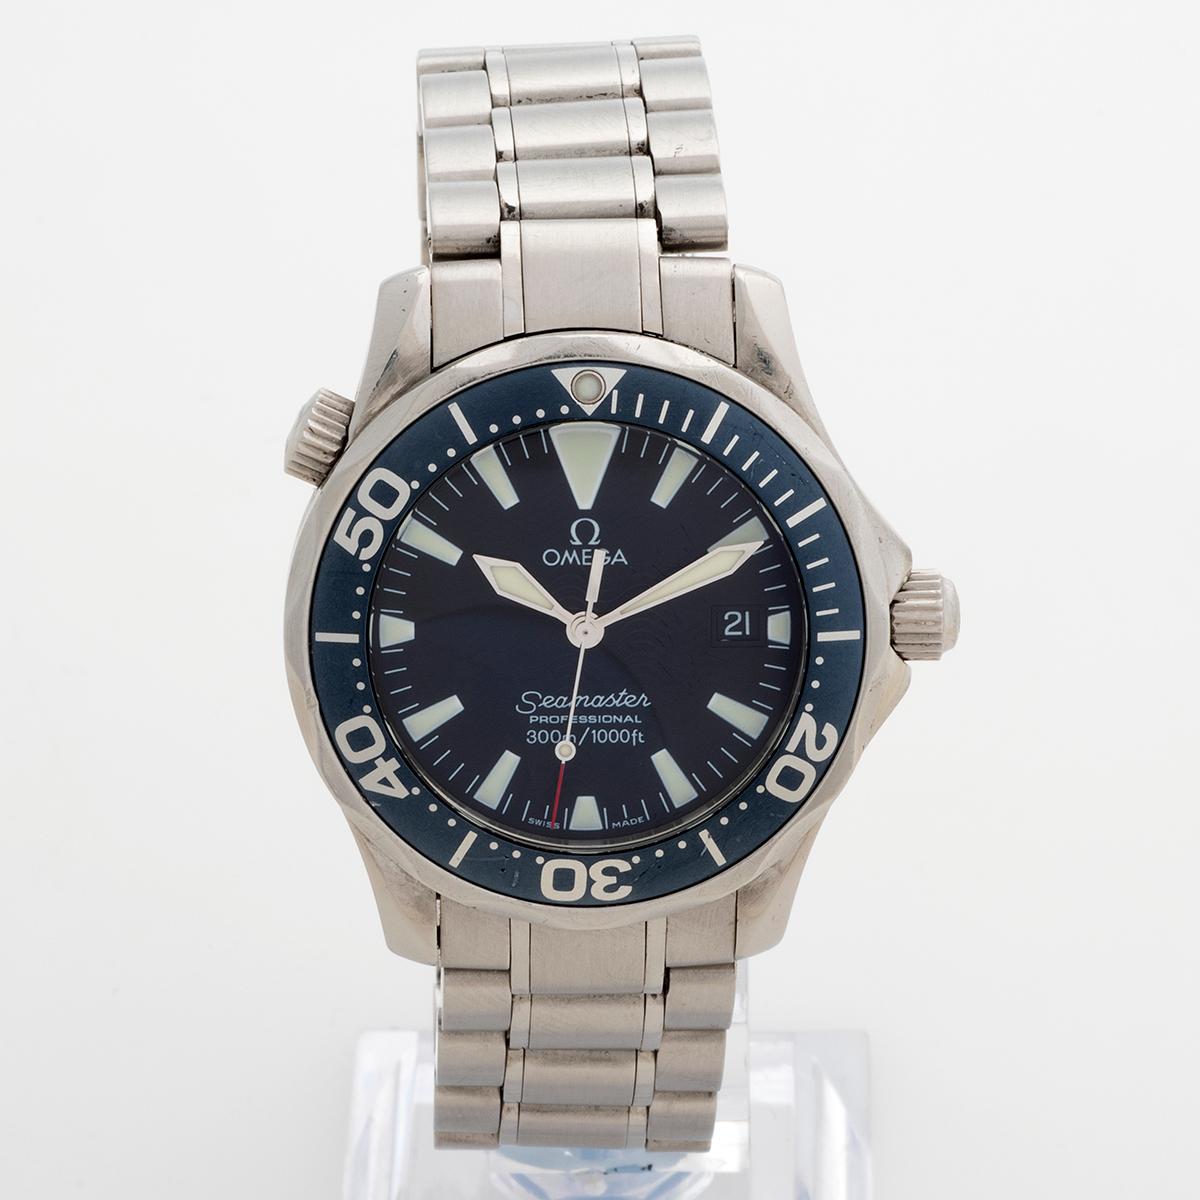 Our Omega Seamaster 300m Professional reference 2262.50.00 with quartz movement, features a 36mm stainless steel case and stainless steel bracelet with attractive black wave dial and lightly patinated black bezel insert which is developing a greyish